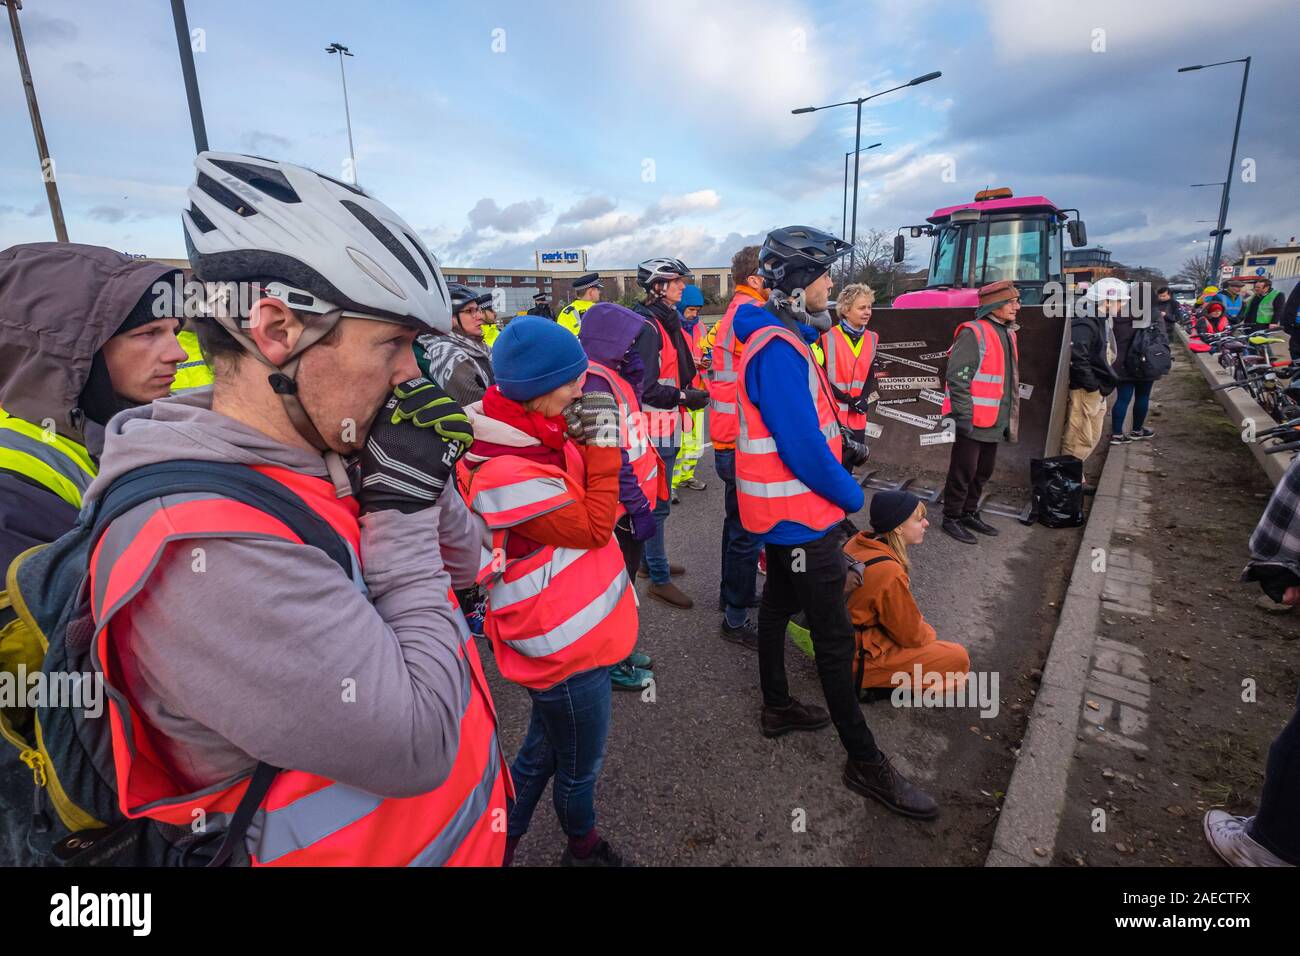 London, UK. 8th December 2019. Extinction Rebellion protesters listen at the end of the lie-in protest against airport expansion in front of a bulldozer on the Heathrow roundabout echoing Boris Johnson's promised he would lie down with John McDonnell 'in front of those bulldozers and stop the construction of that third runway'. XR brought the bulldozer, but Boris didn't turn up. Police stopped them going to the Heathrow roundabout and instead the protest blocked one lane of the A4. Peter Marshall/Alamy Live News Stock Photo